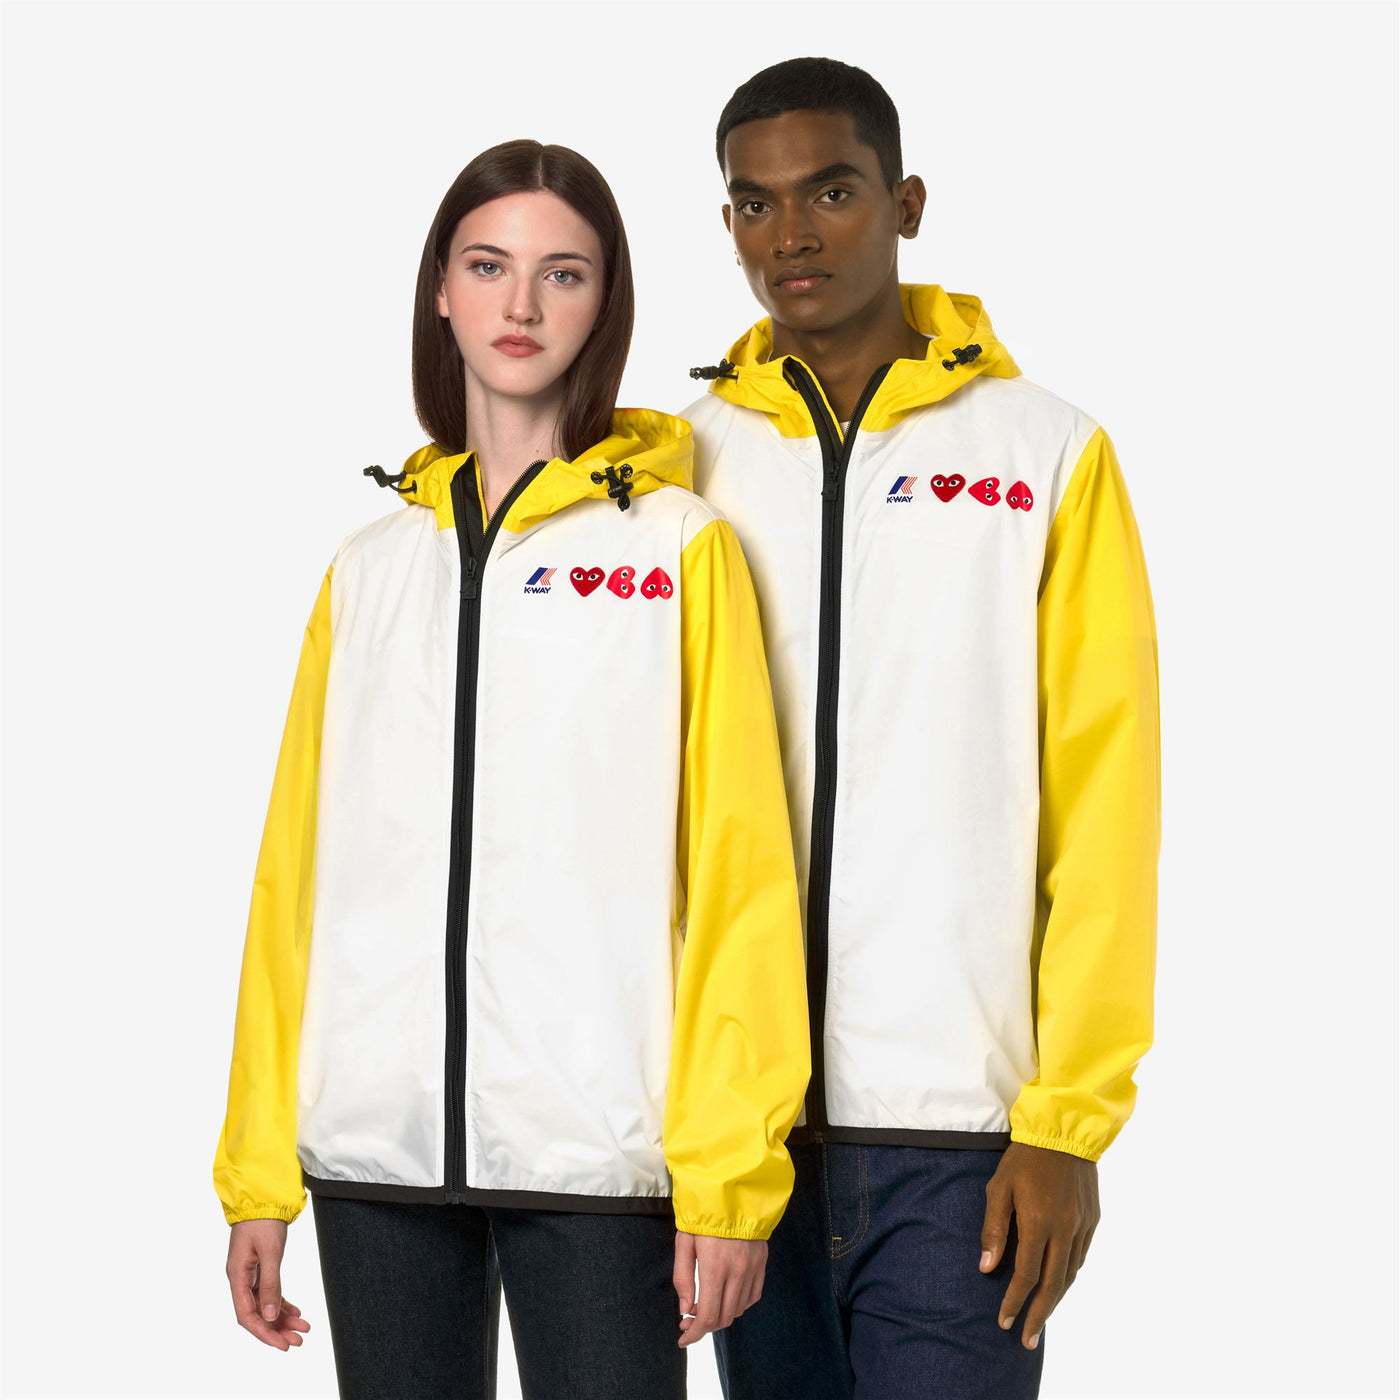 Jackets Unisex LE VRAI 3.0 CLAUDE CDG OPEN US OF SURFING BICOLOR Mid WHITE - YELLOW DK Detail Double				